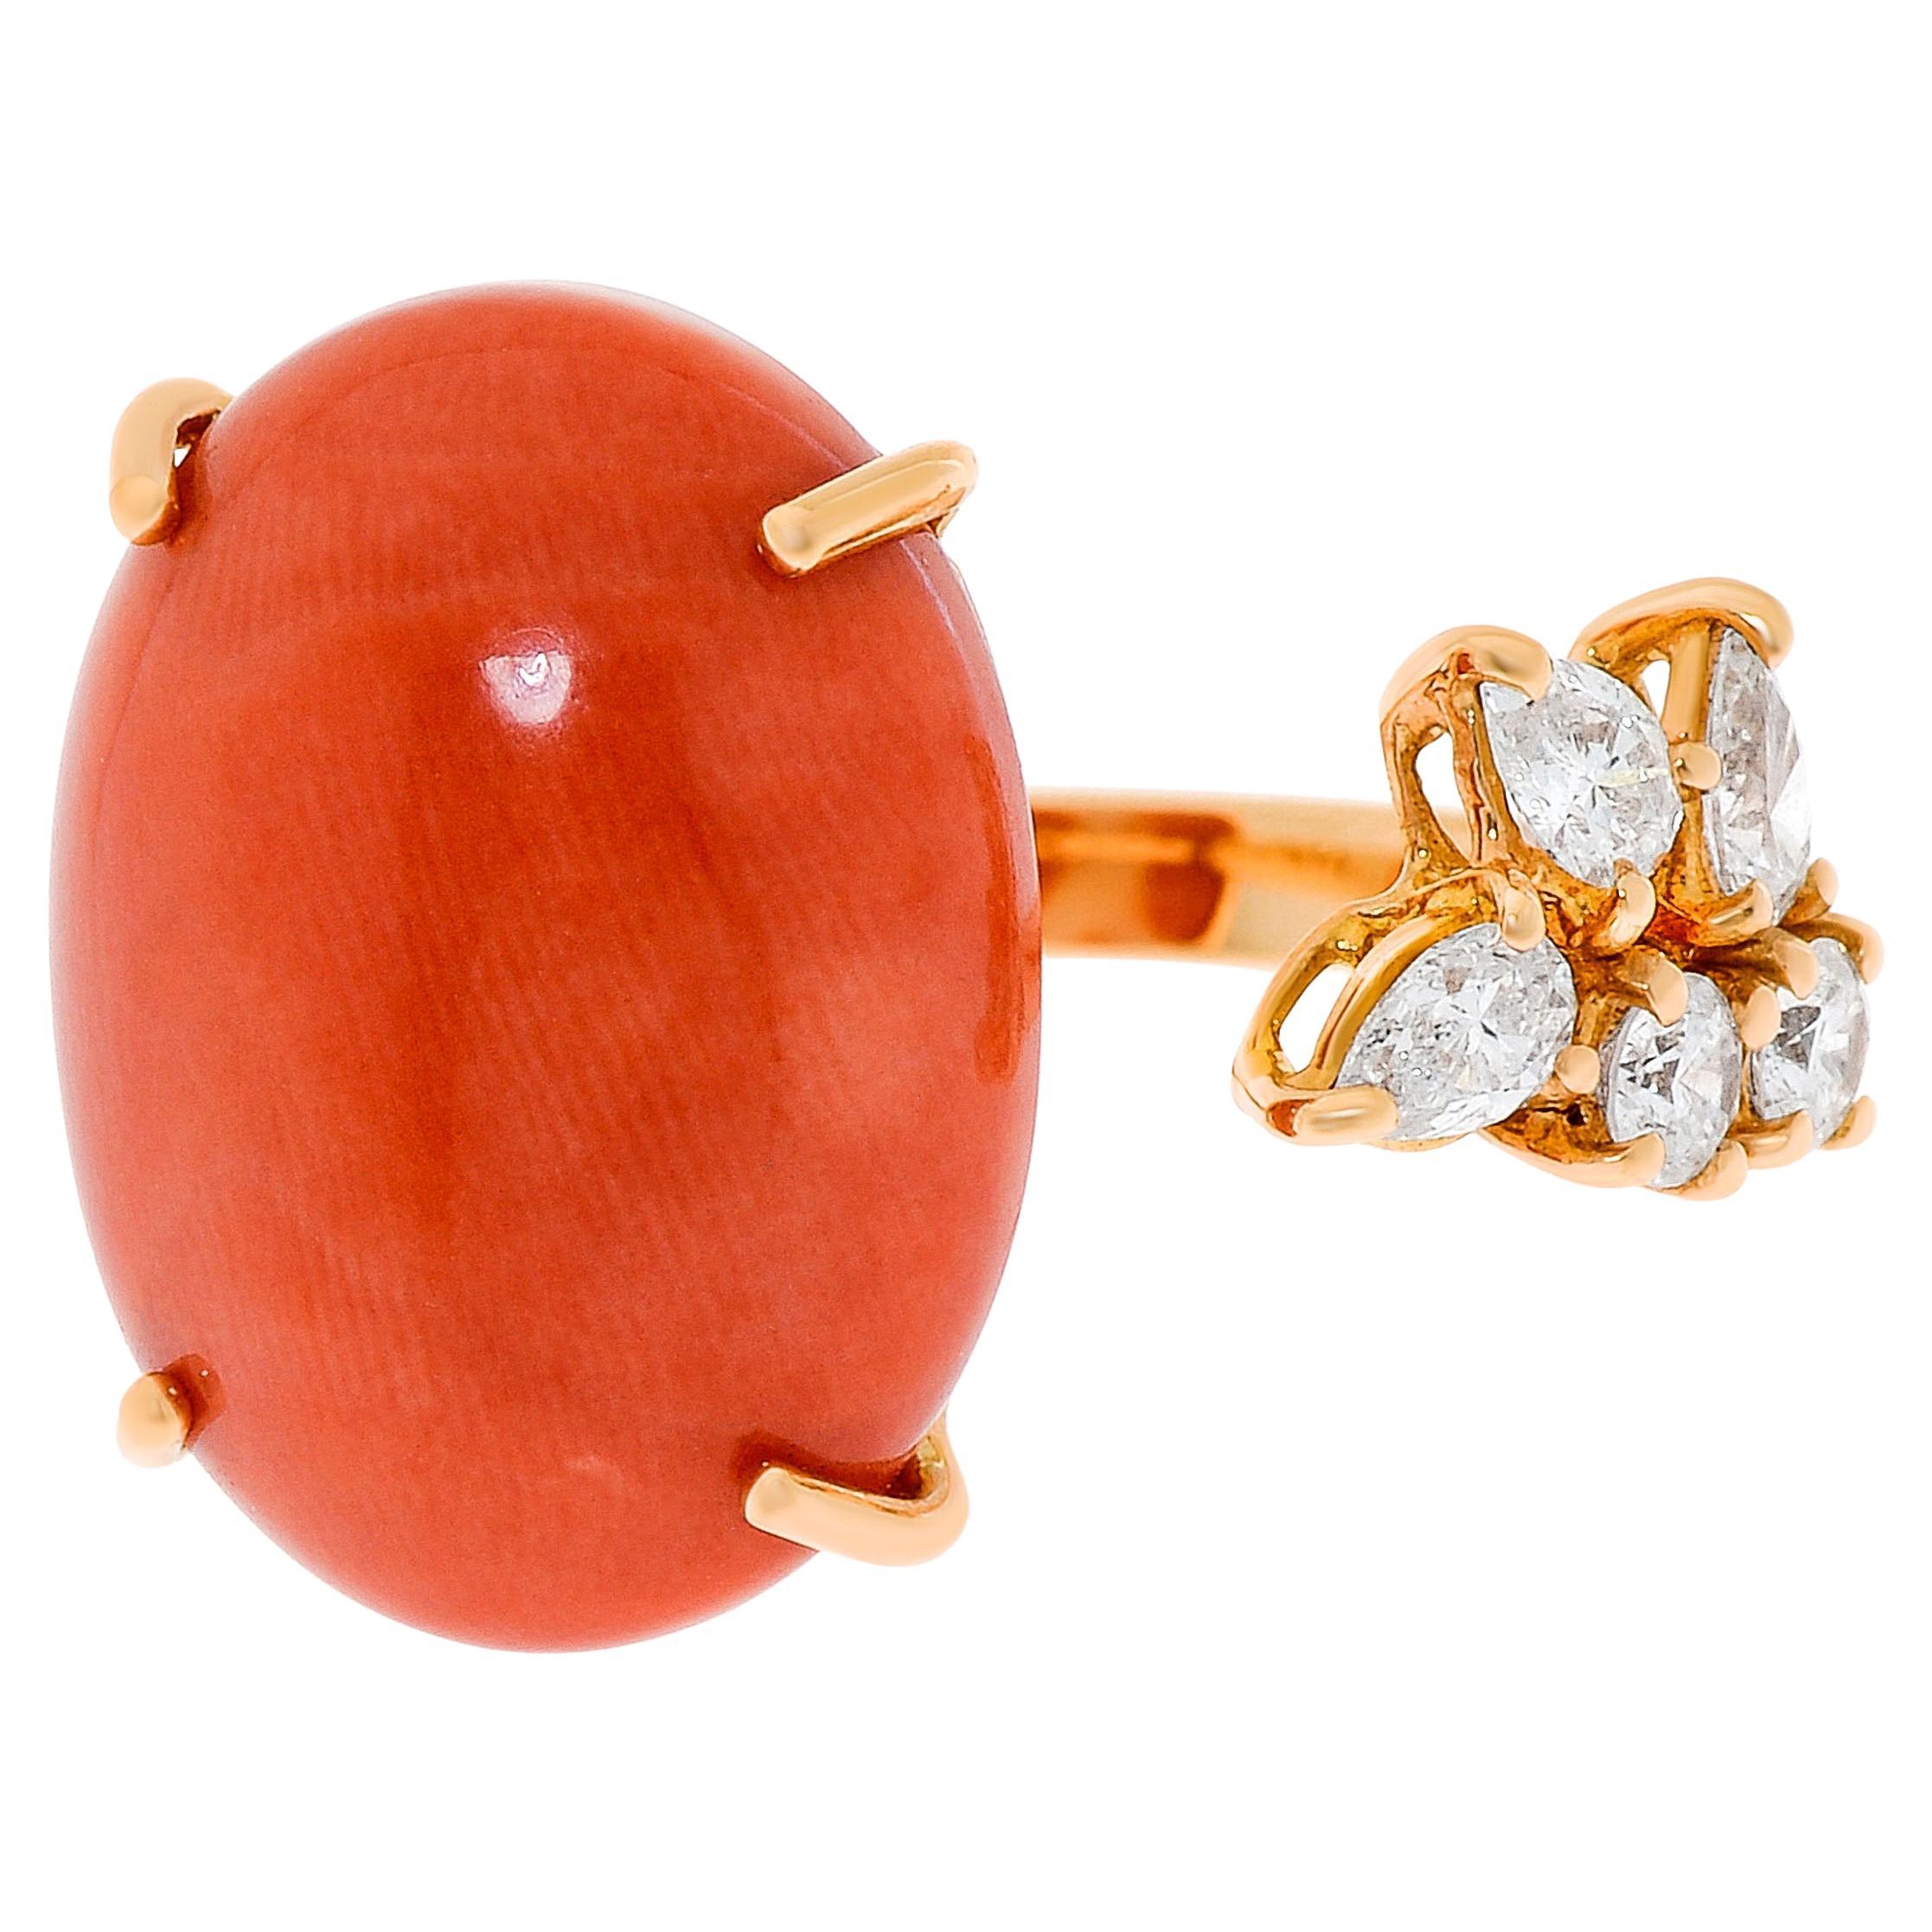 Zydo 18K Rose Gold, Coral and White Diamond Gemstone Ring sz. 6.5 For Sale